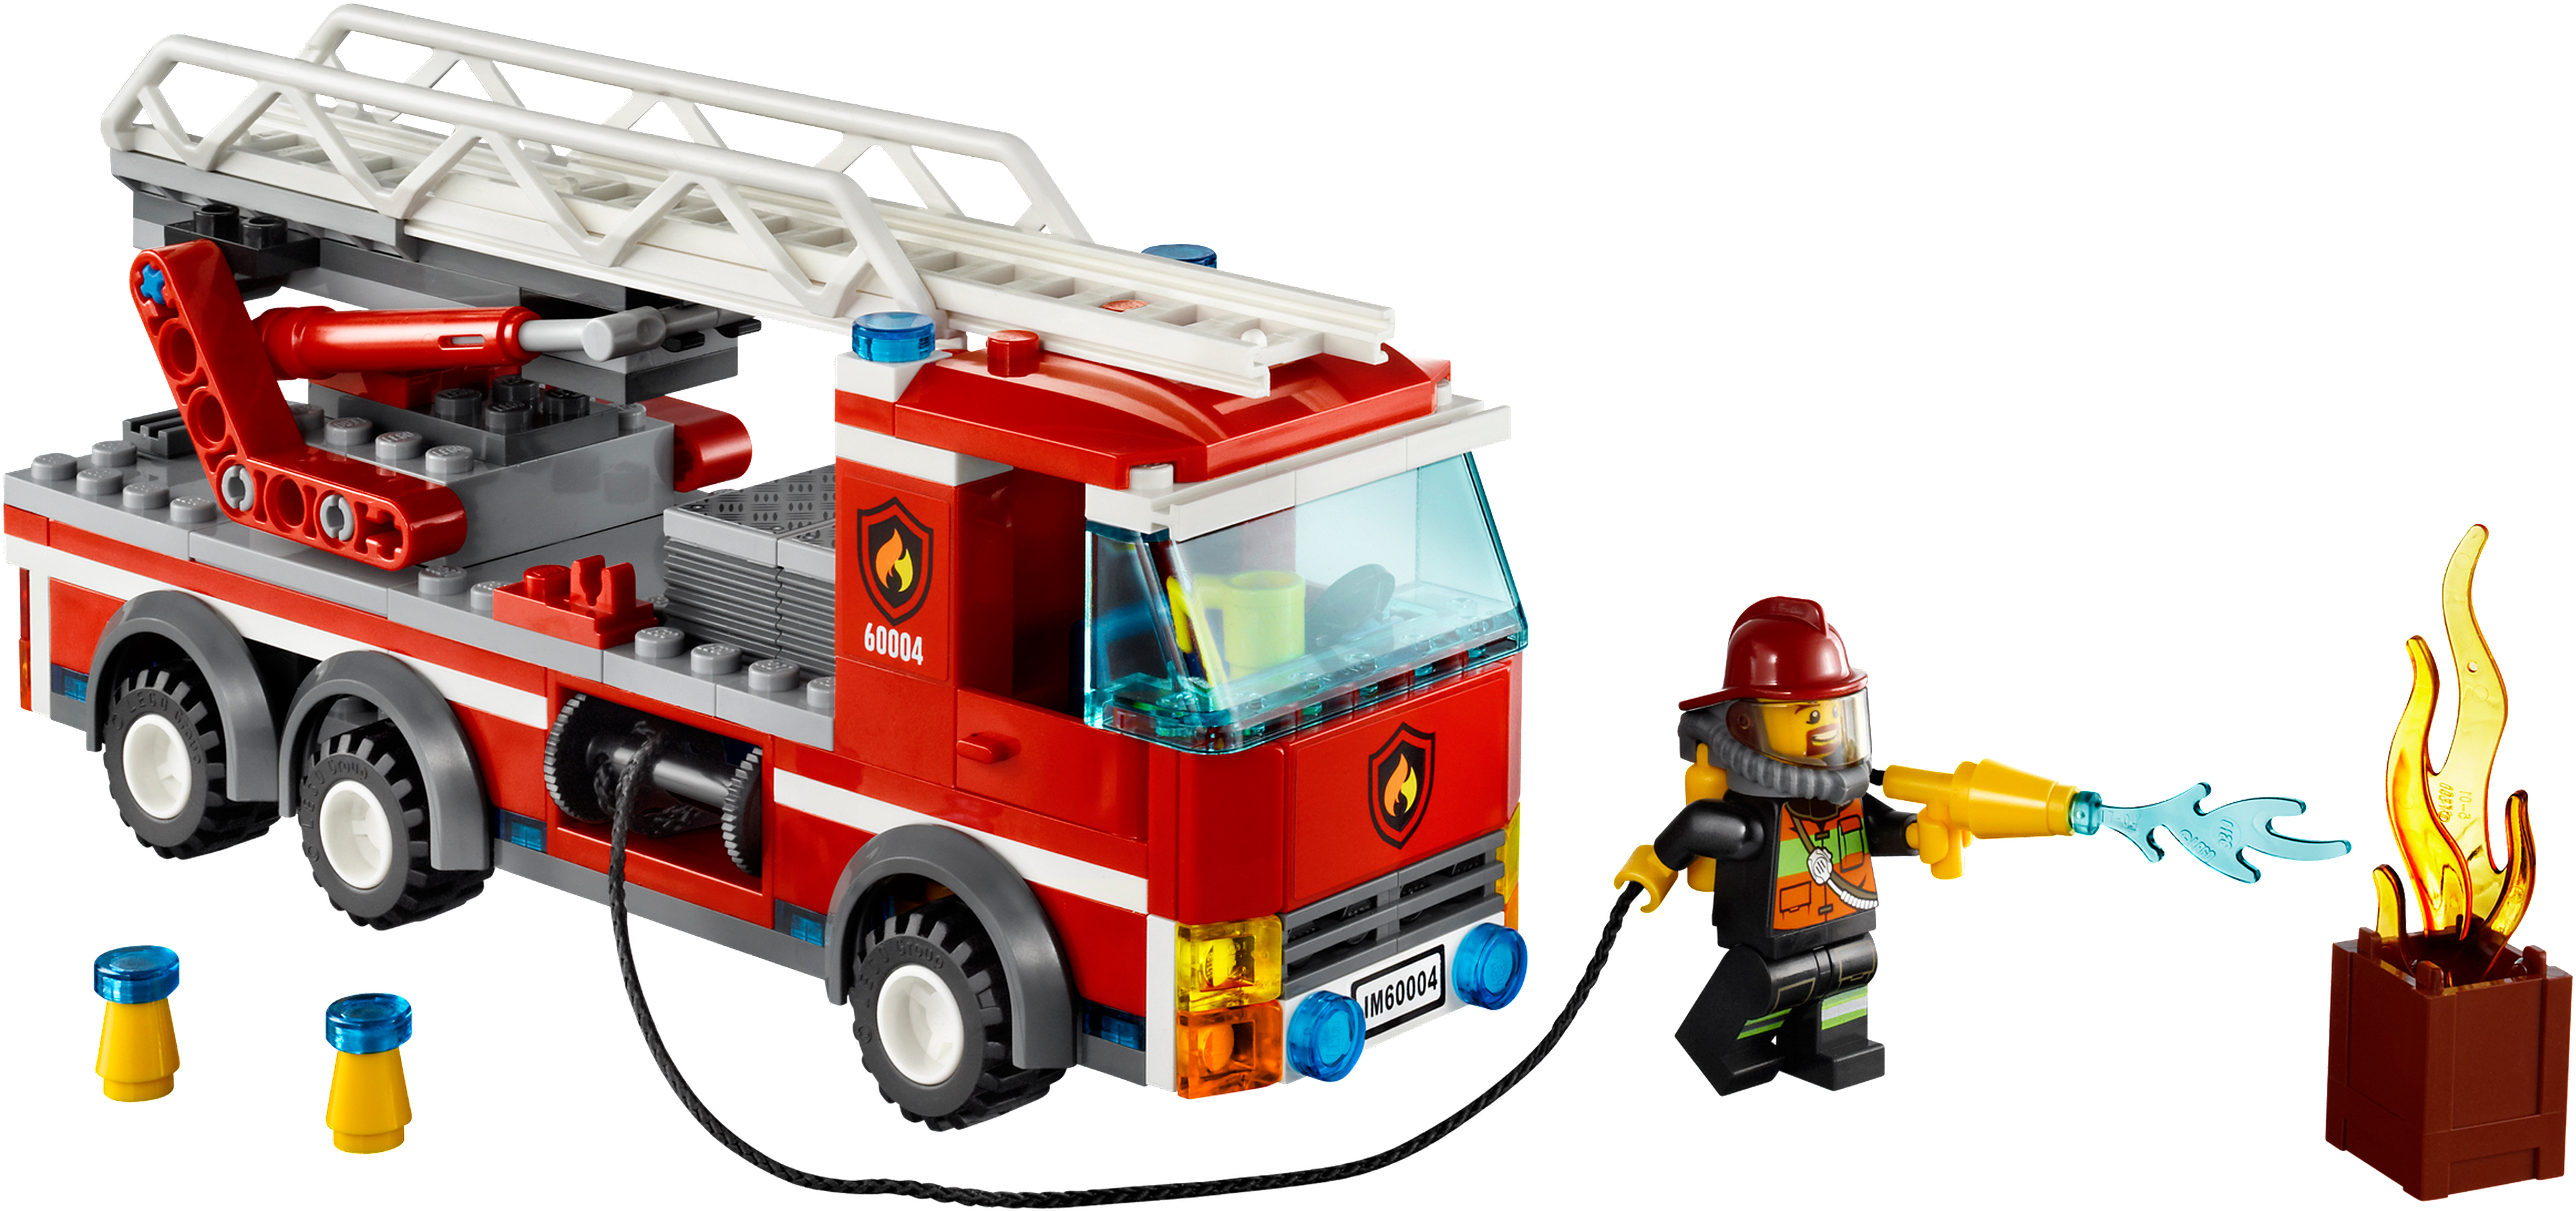 A Toy Fire Engine With A Fireman